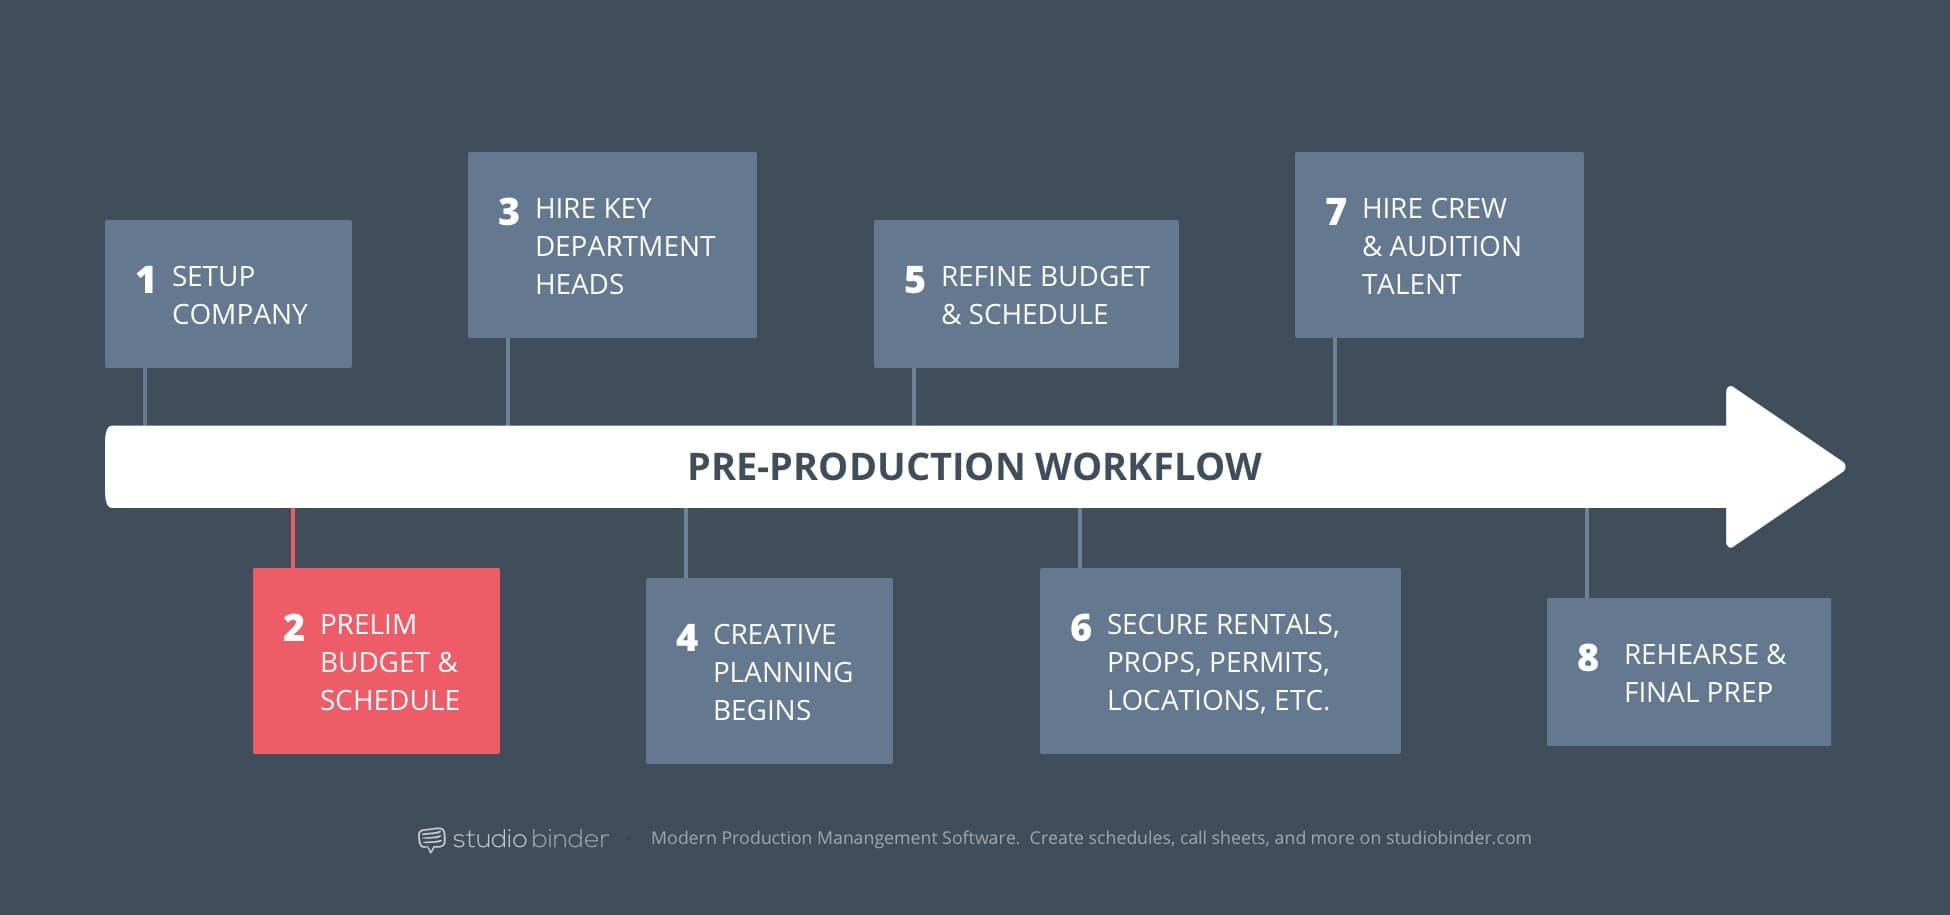 2 - StudioBinder Pre-Production Workflow - Prelim Budget and Scheduling